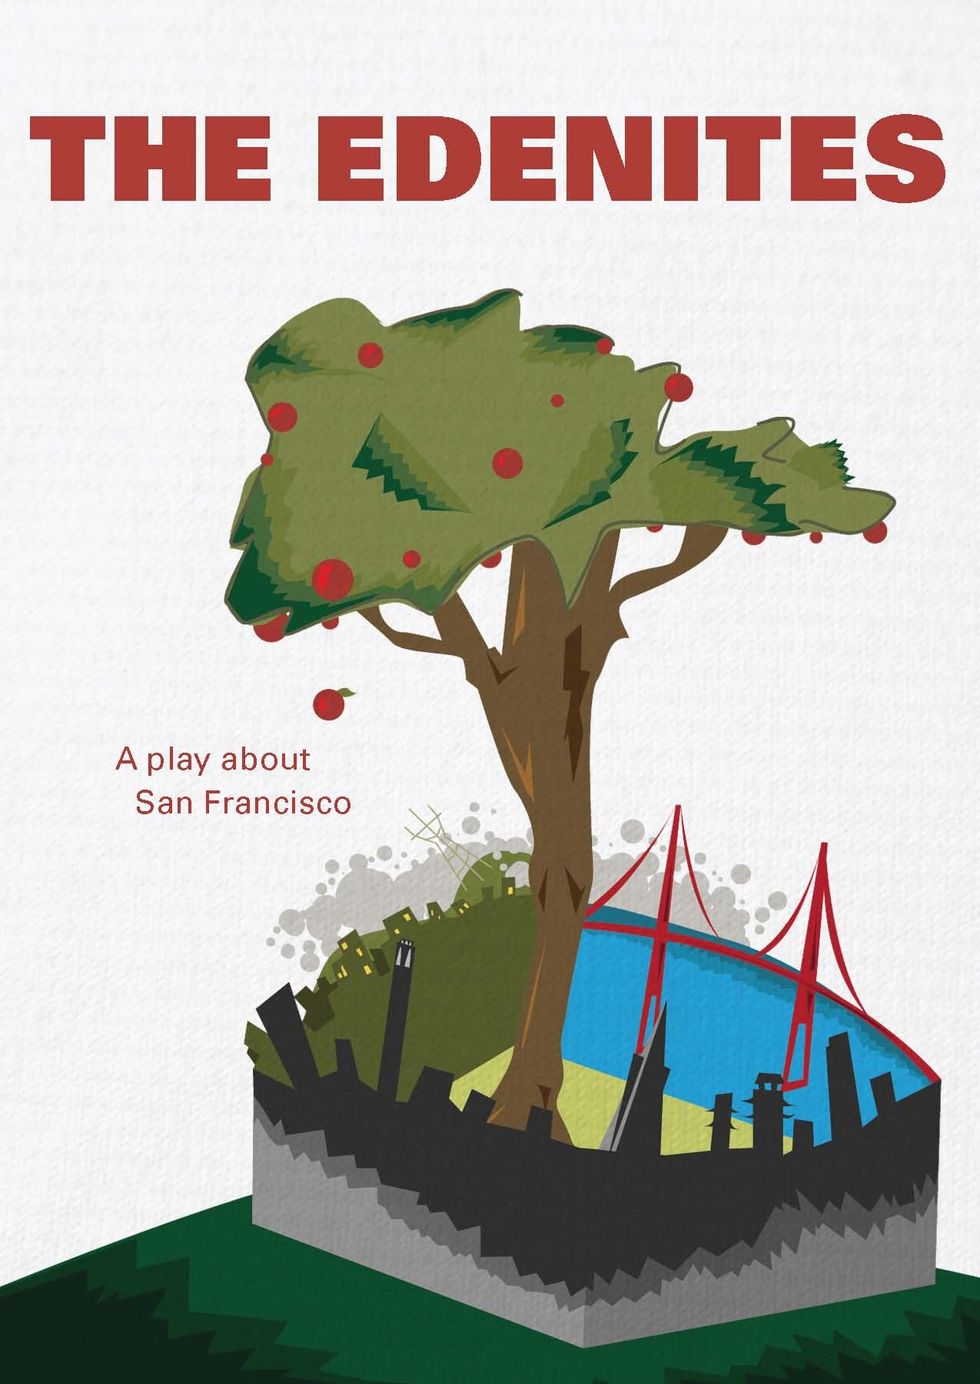 The Edenites, New Play About San Francisco at the Exit